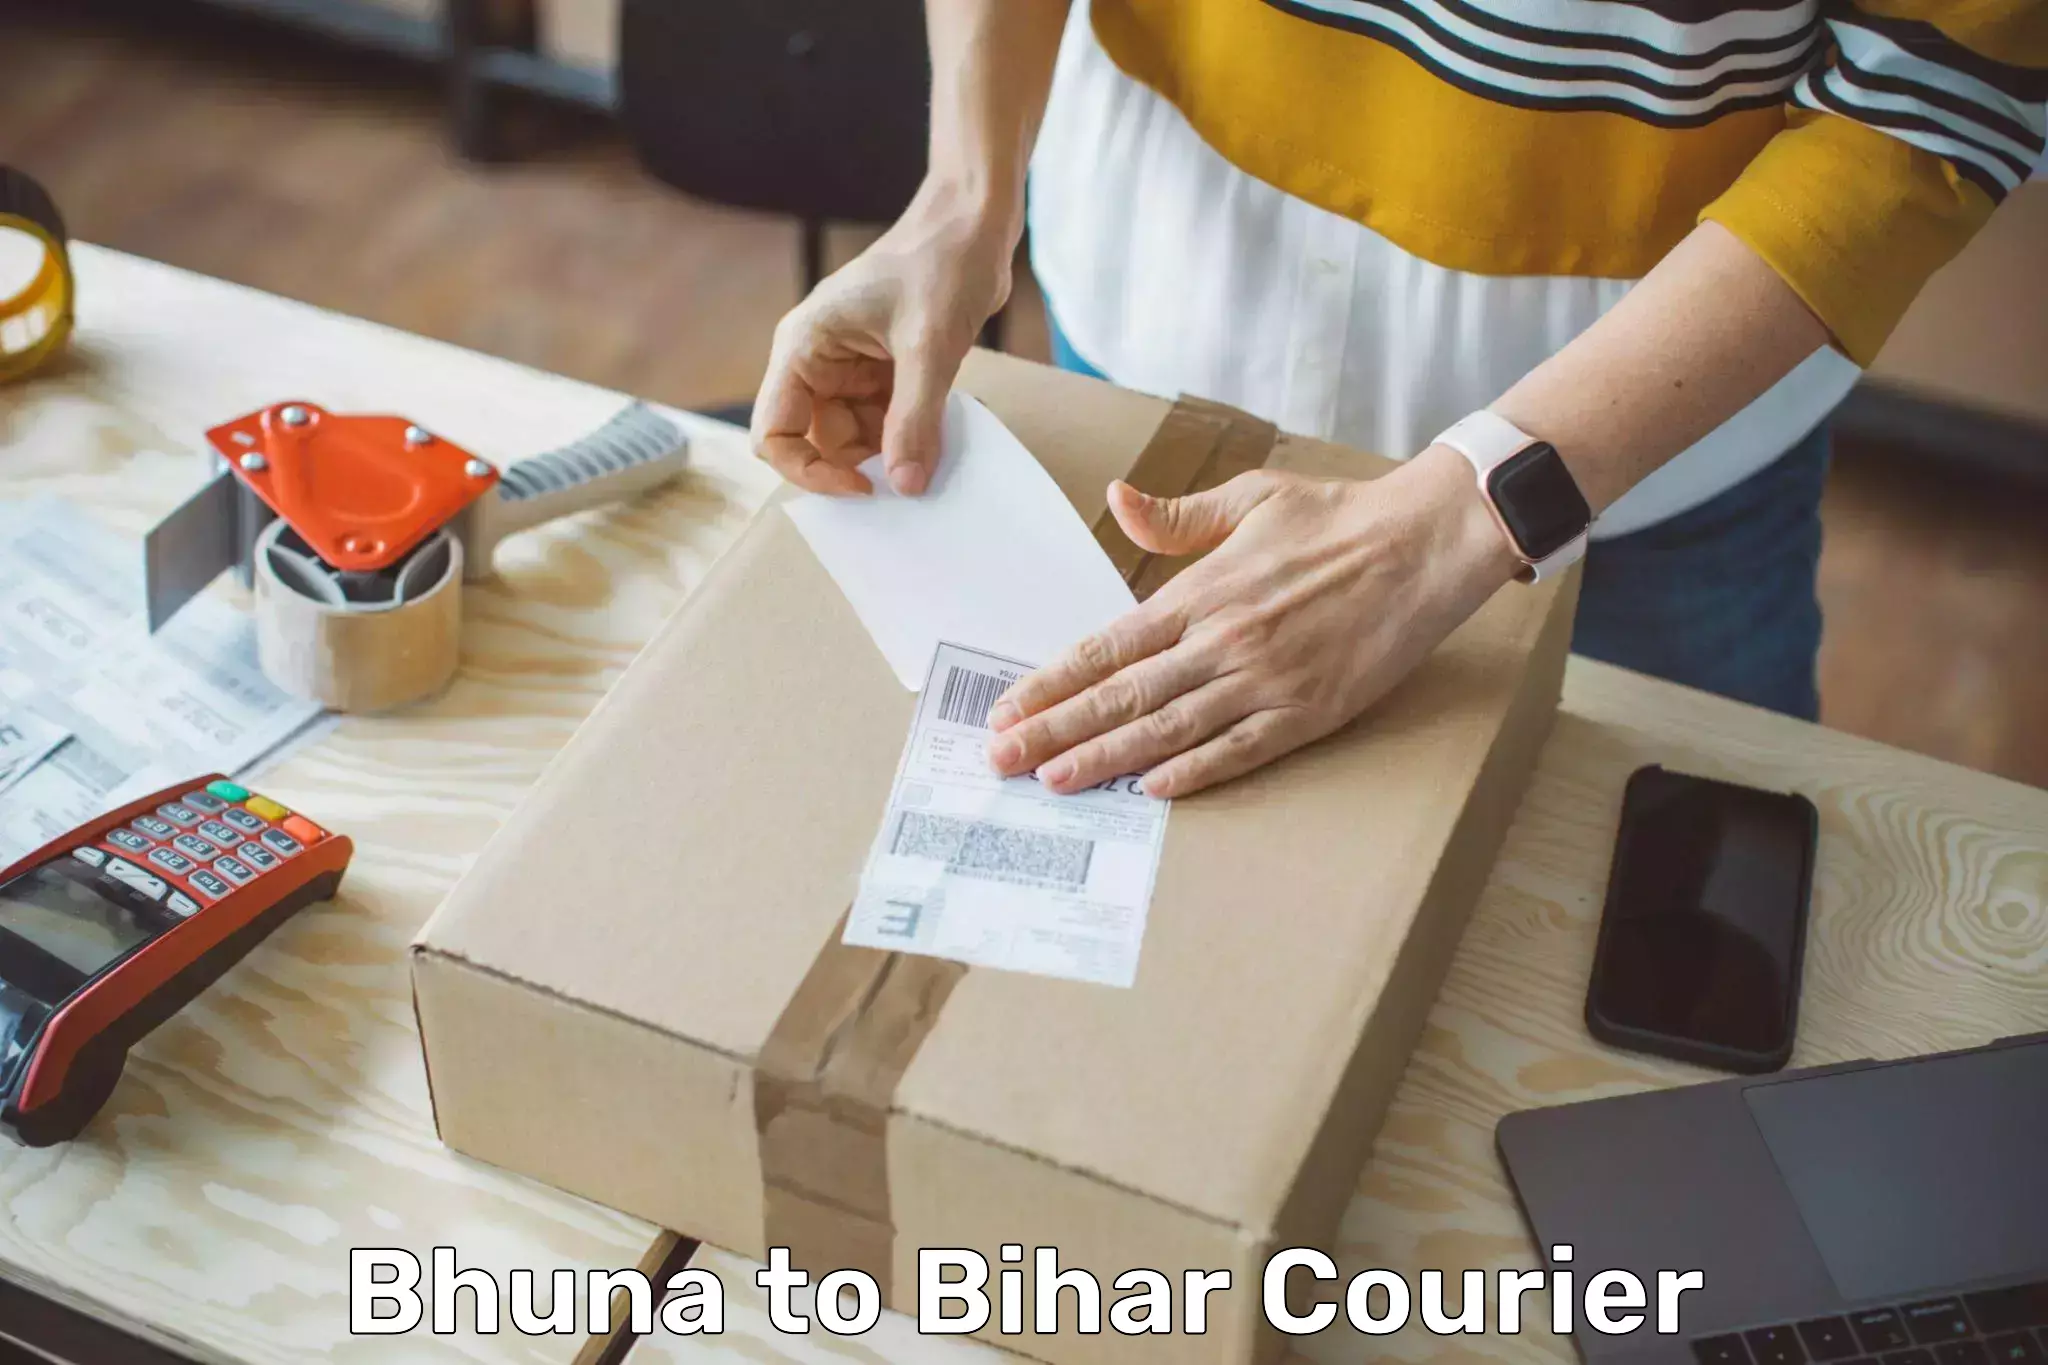 Large-scale shipping solutions Bhuna to Bihar